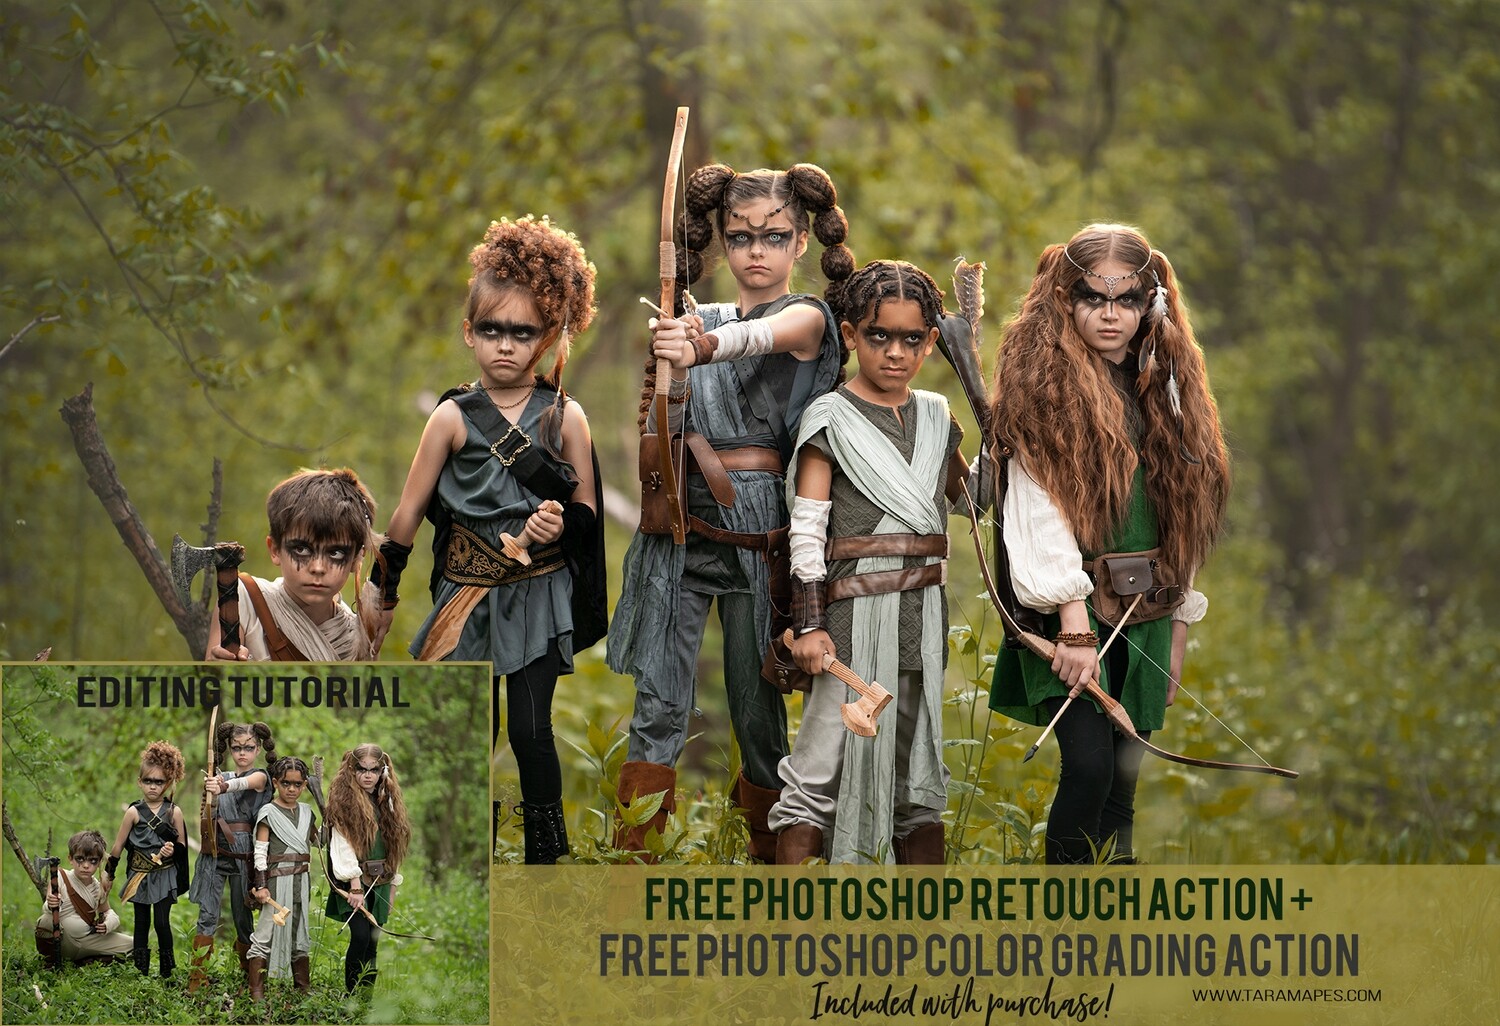 Woodland Warriors Photoshop Tutorial - Photoshop Action Workflow Set Included -- Color Grading Action Set Included - Fine Art Painterly Tutorial by Tara Mapes